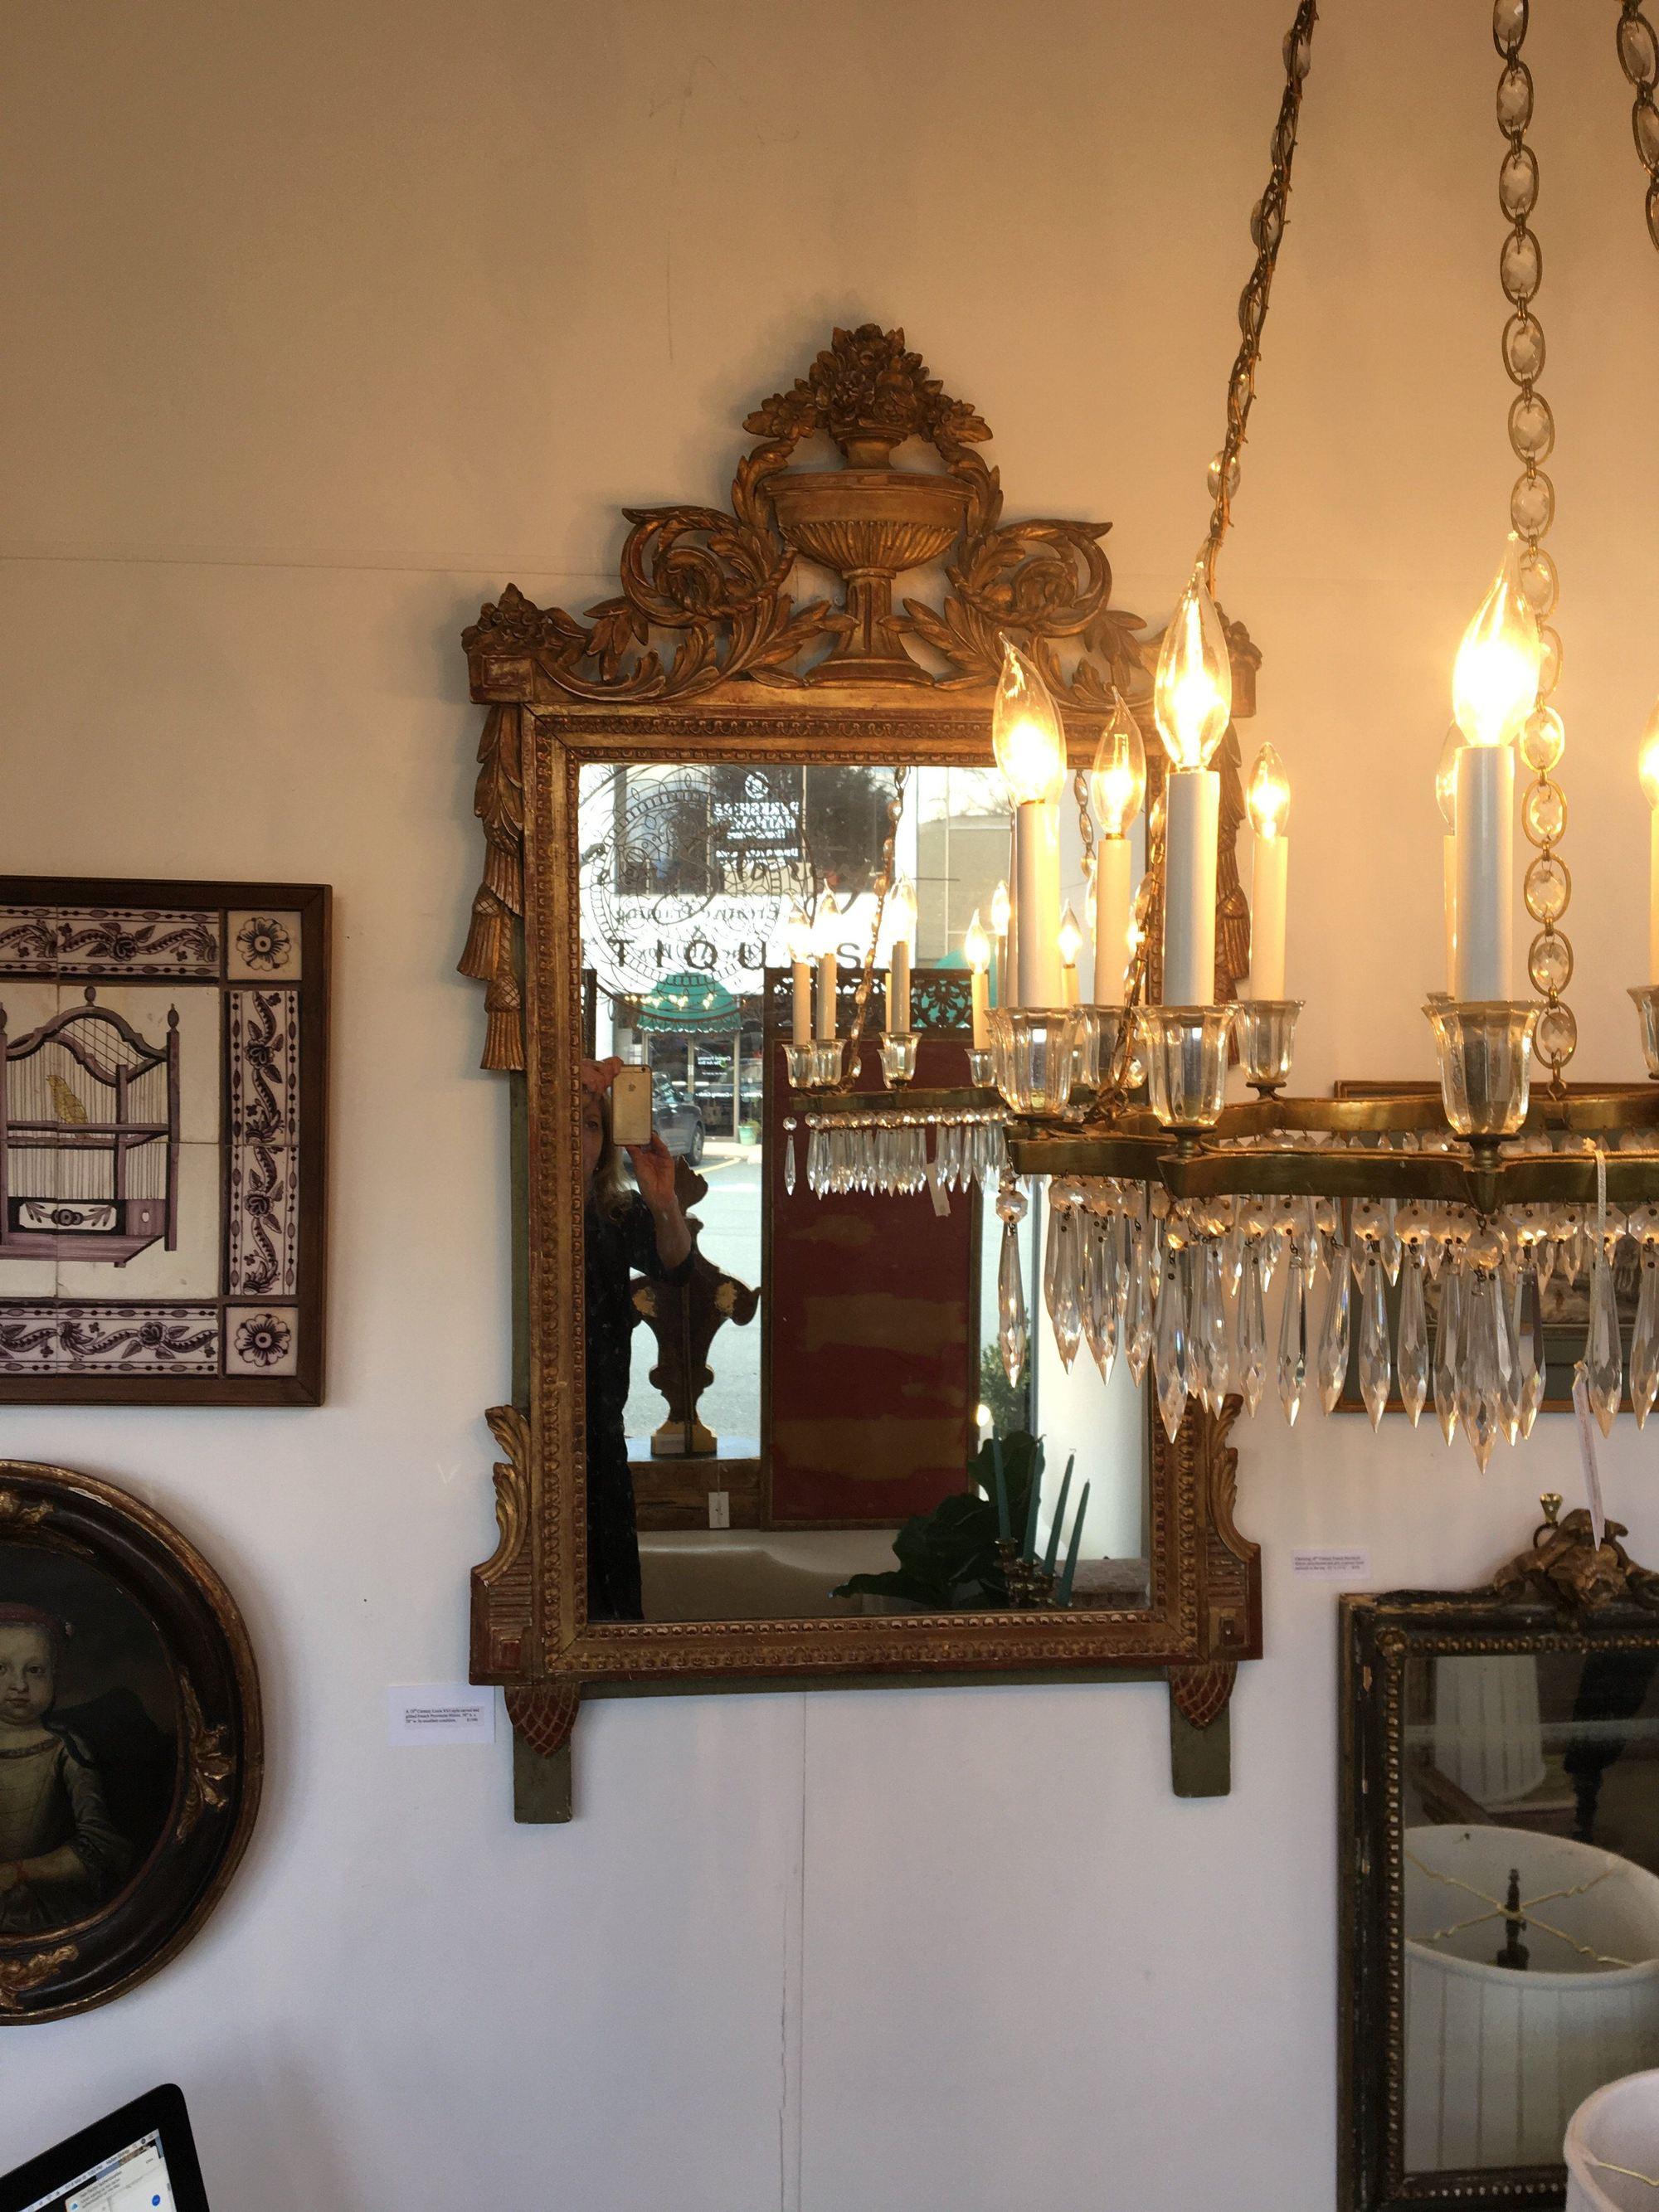 A 19th century Louis XVI style carved and gilded French Provincial mirror, 50” H. x 20” W. In excellent condition.